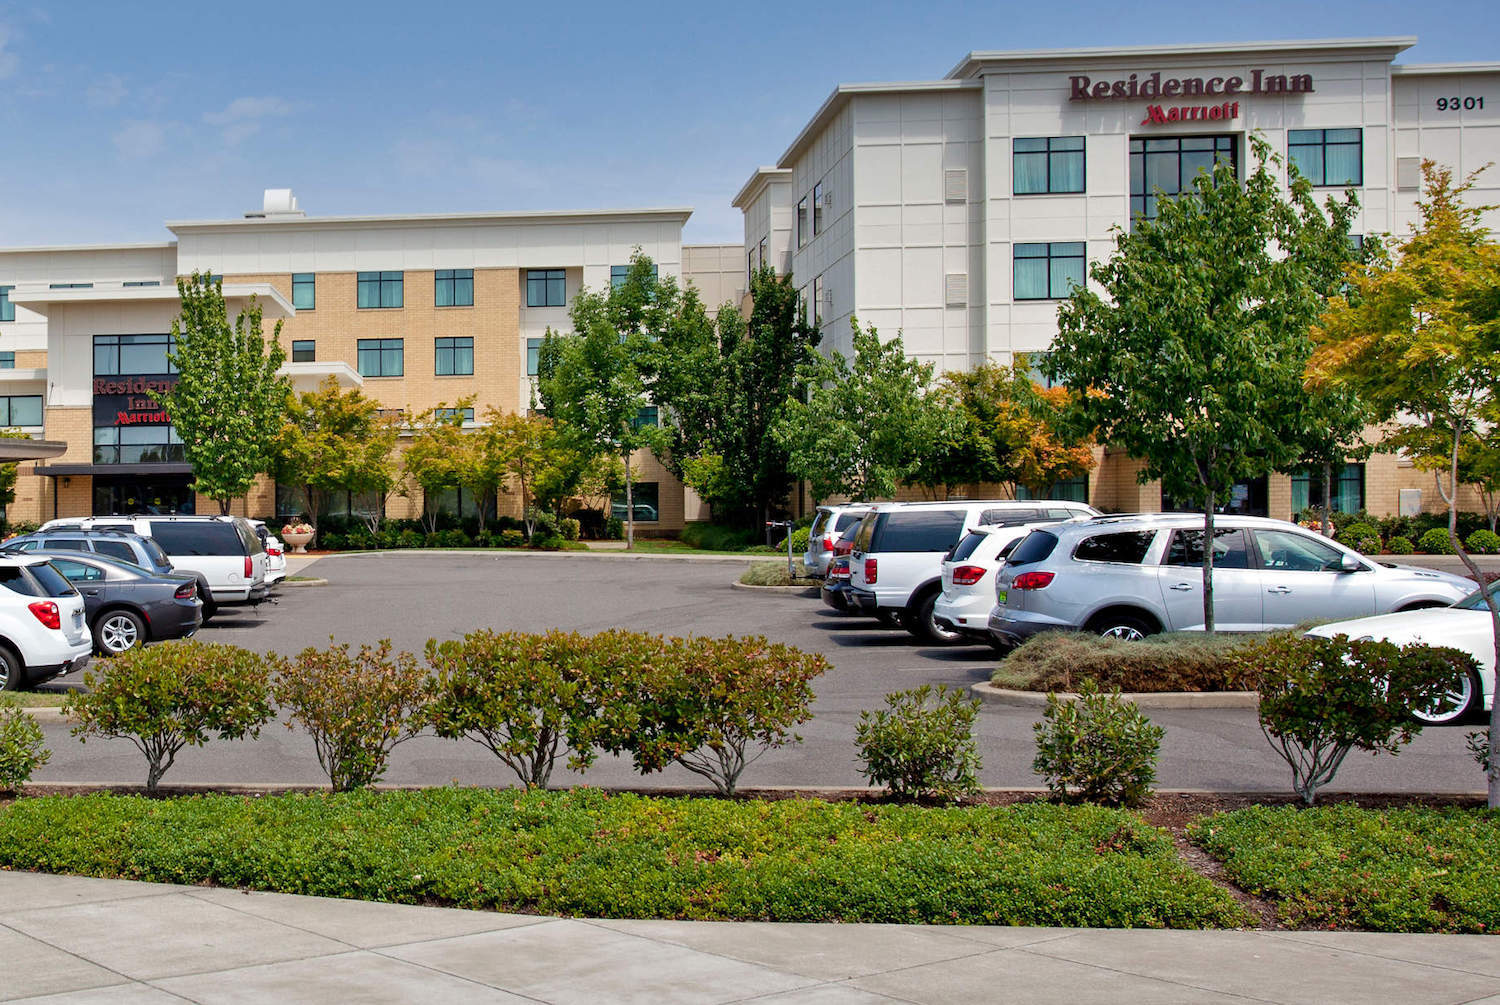 Photo of Residence Inn Portland Airport at Cascade Station, Portland, OR